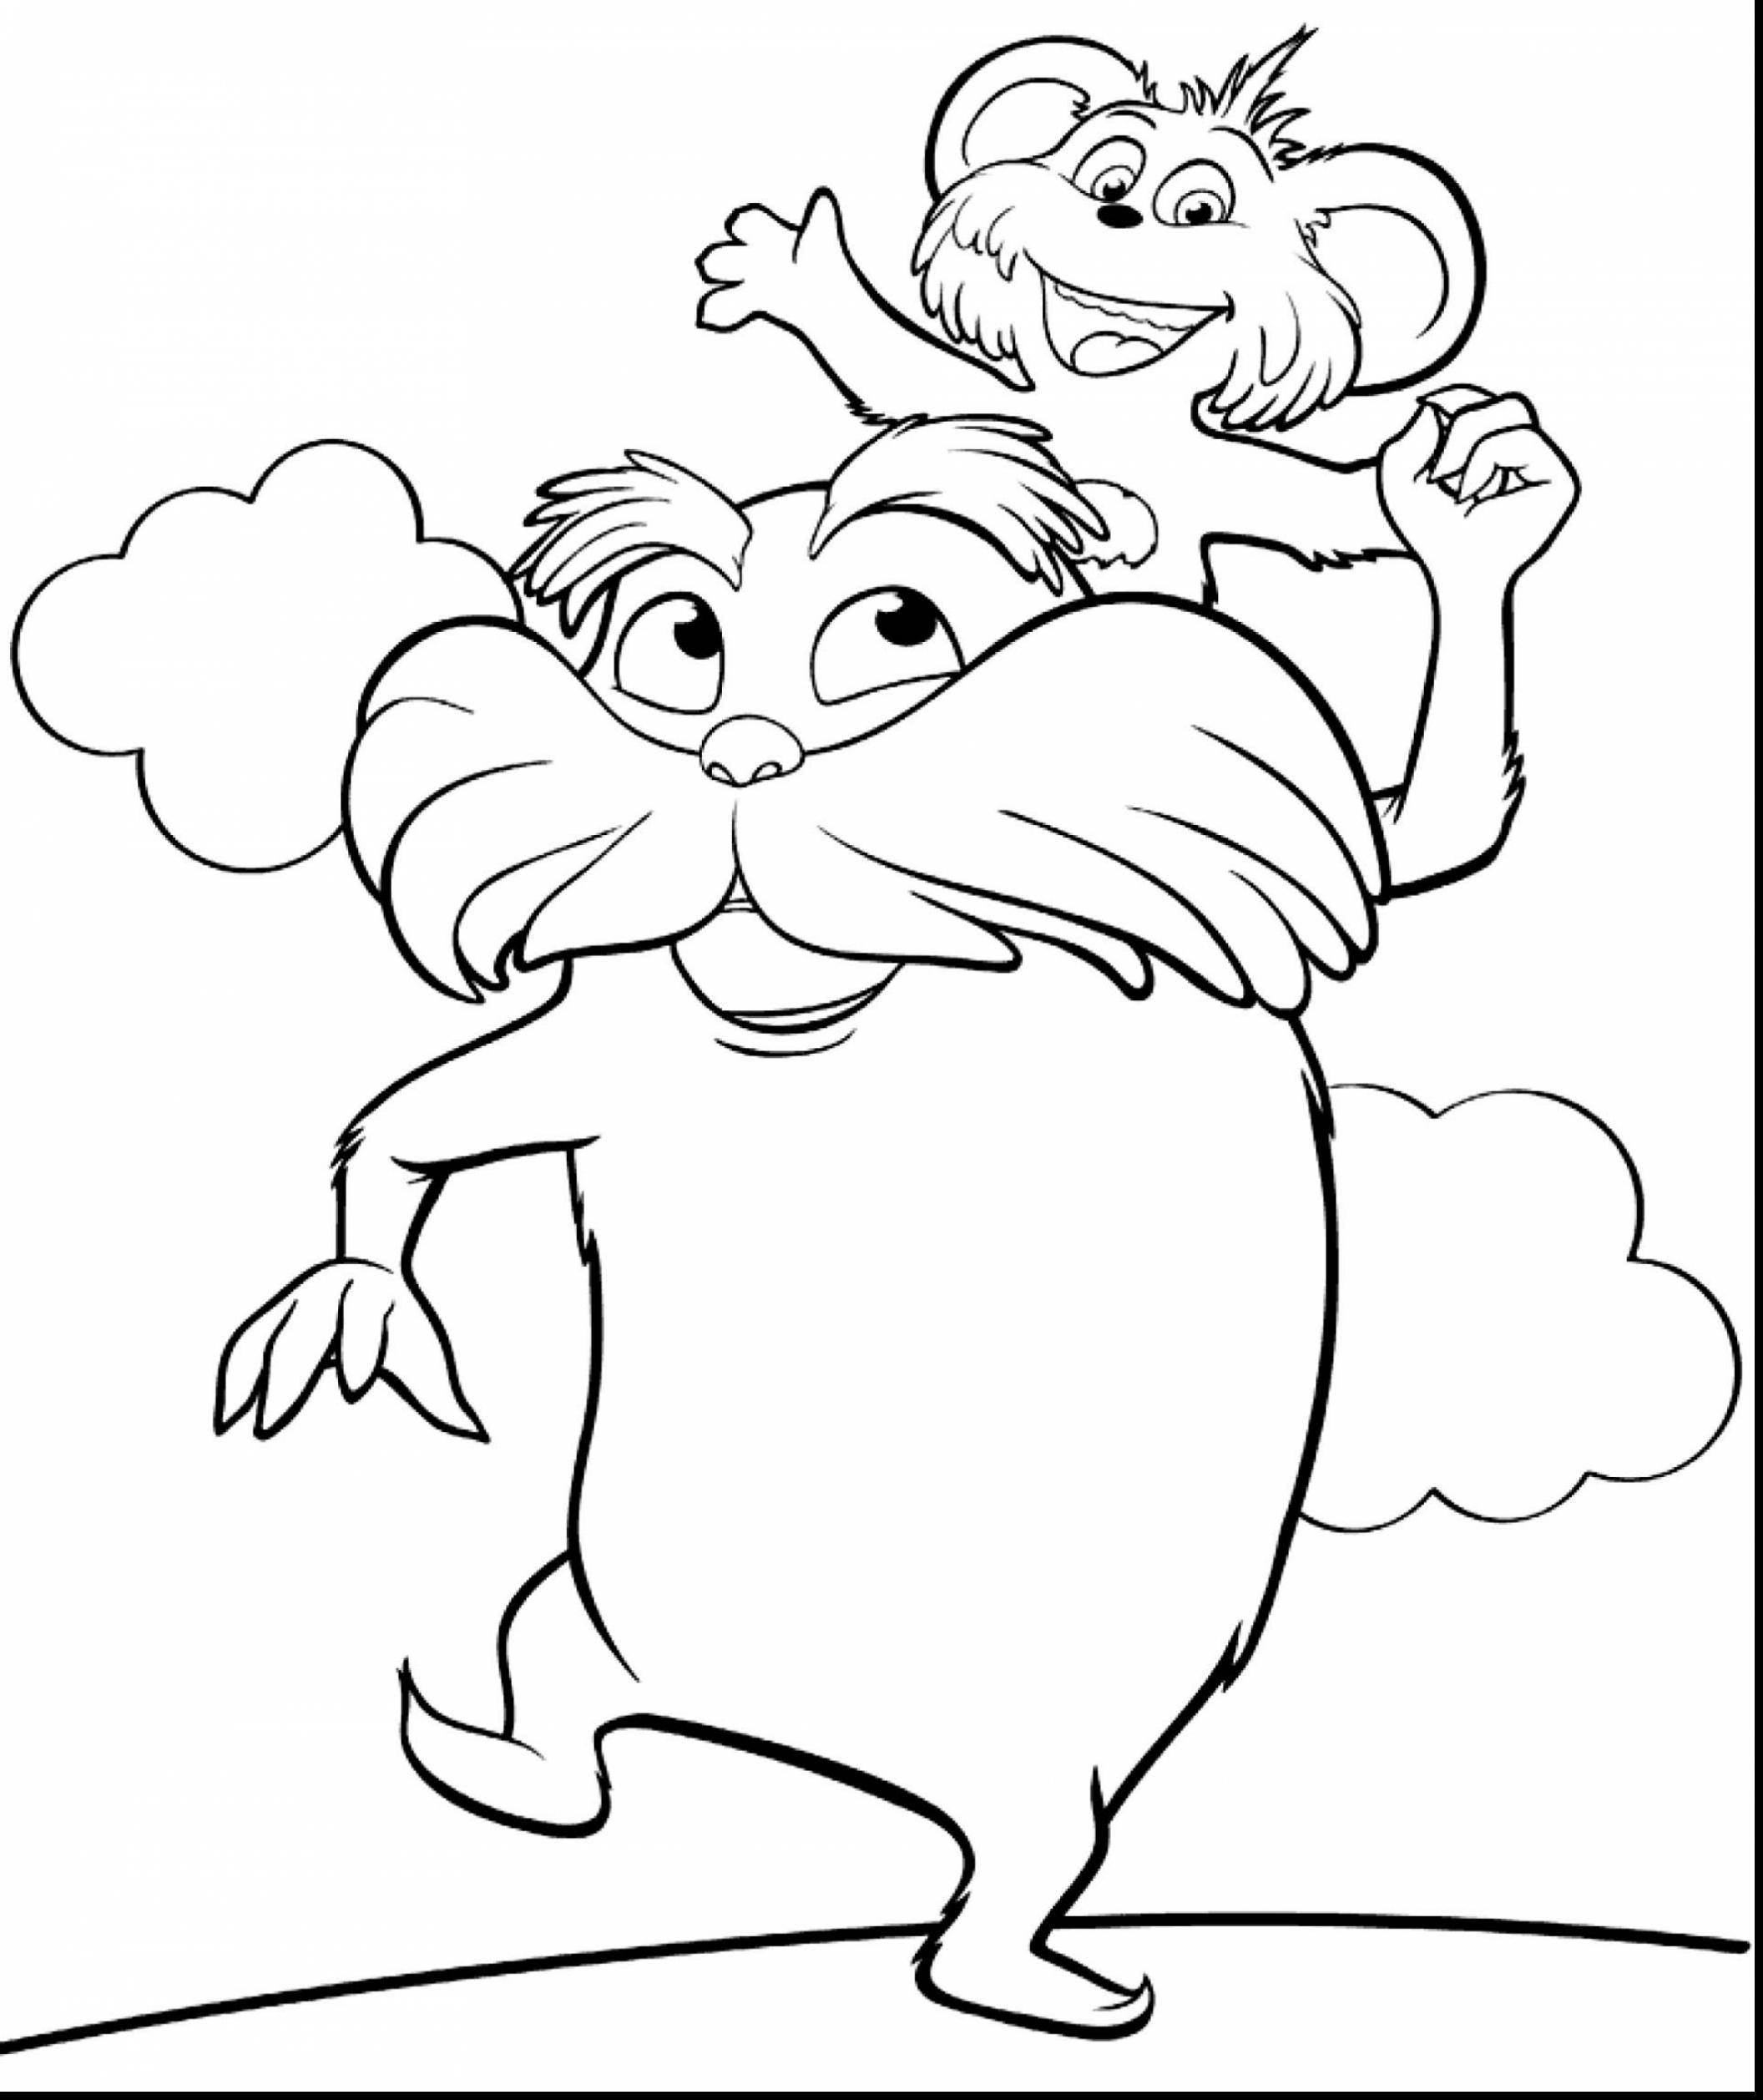 Cat In The Hat Coloring Pages Pdf at GetColorings.com ...